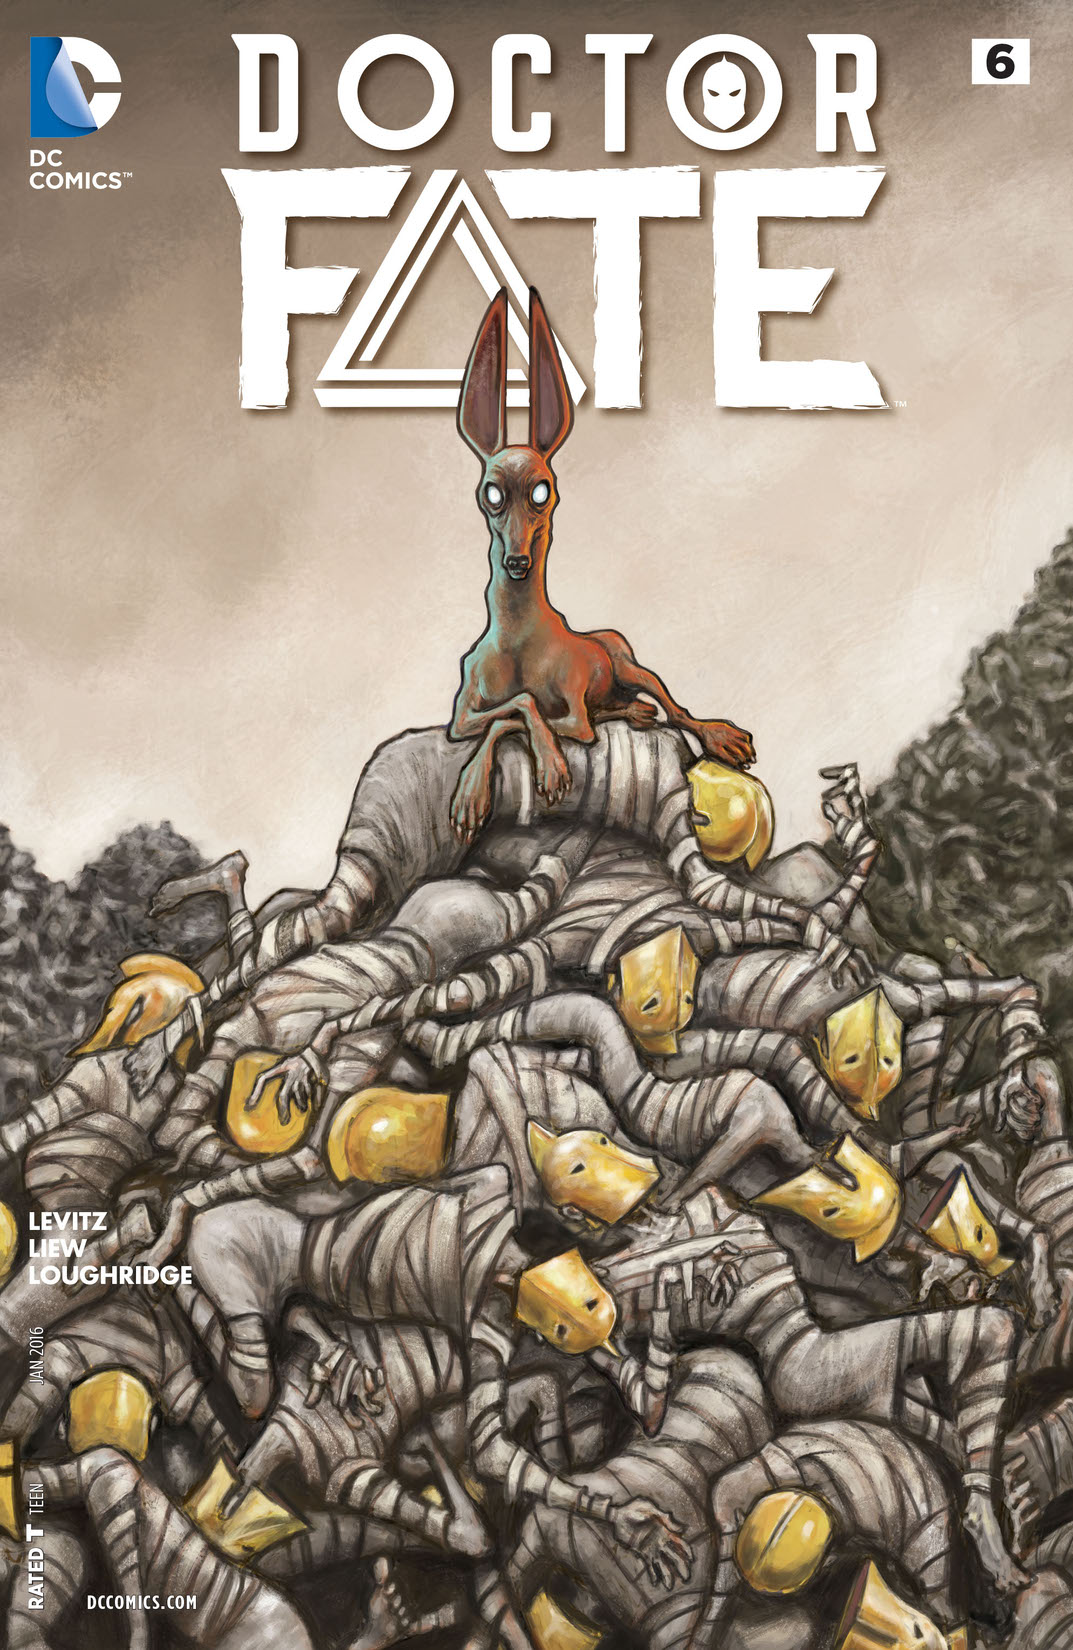 Doctor Fate (2015-) #6 preview images